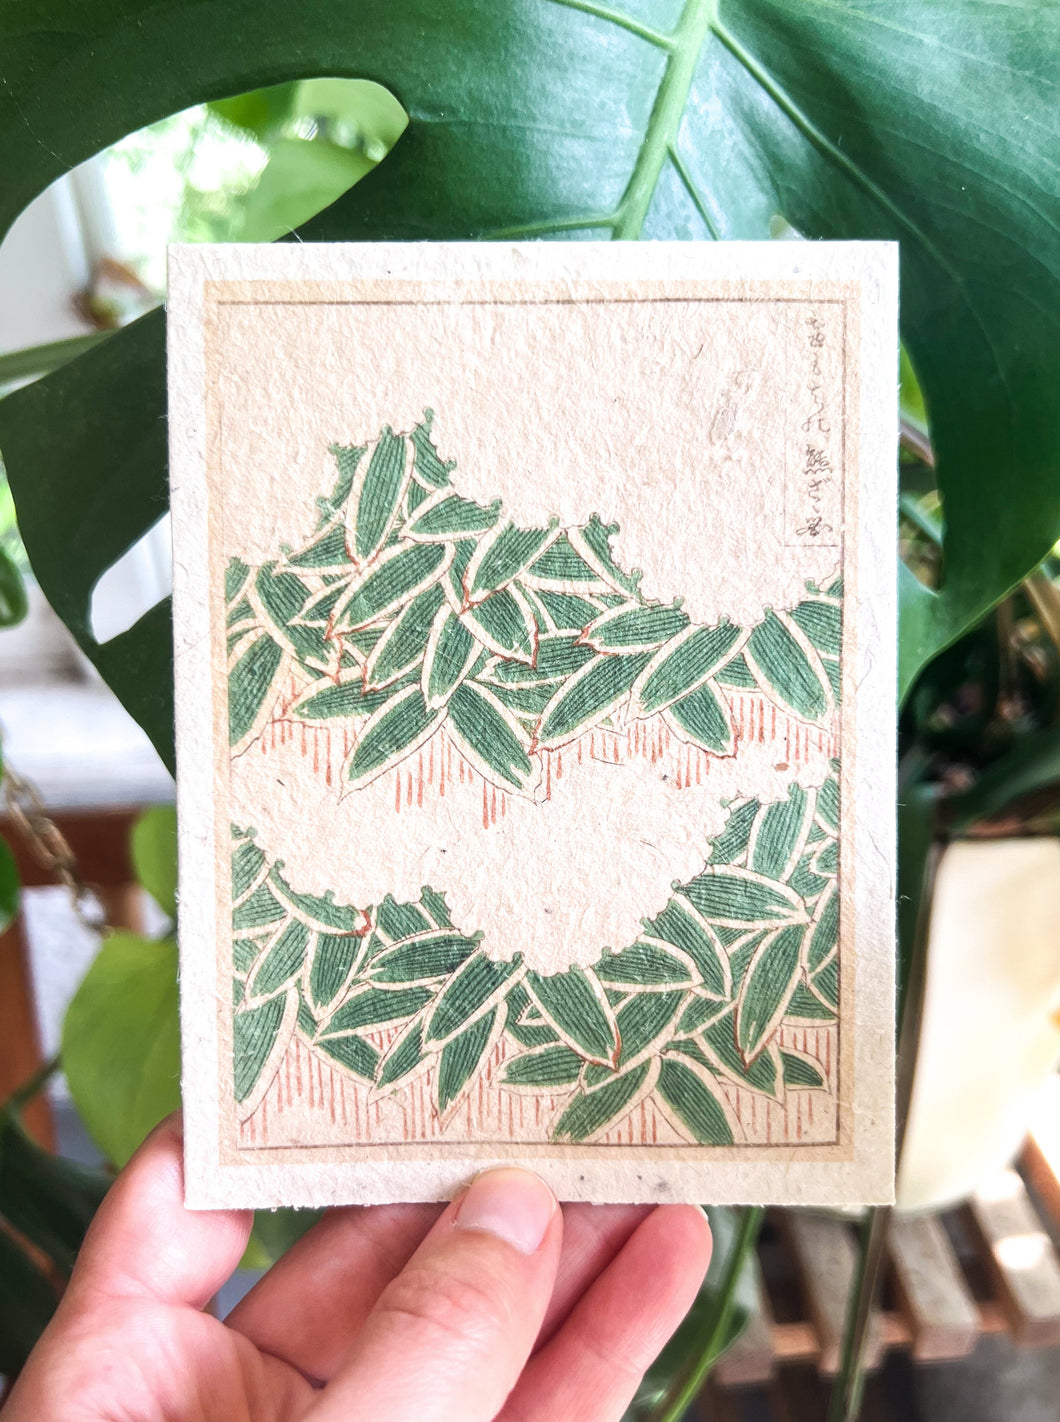 Japanese Plantable Seed Card || Zero Waste || Supports Women || Eco-friendly || J9